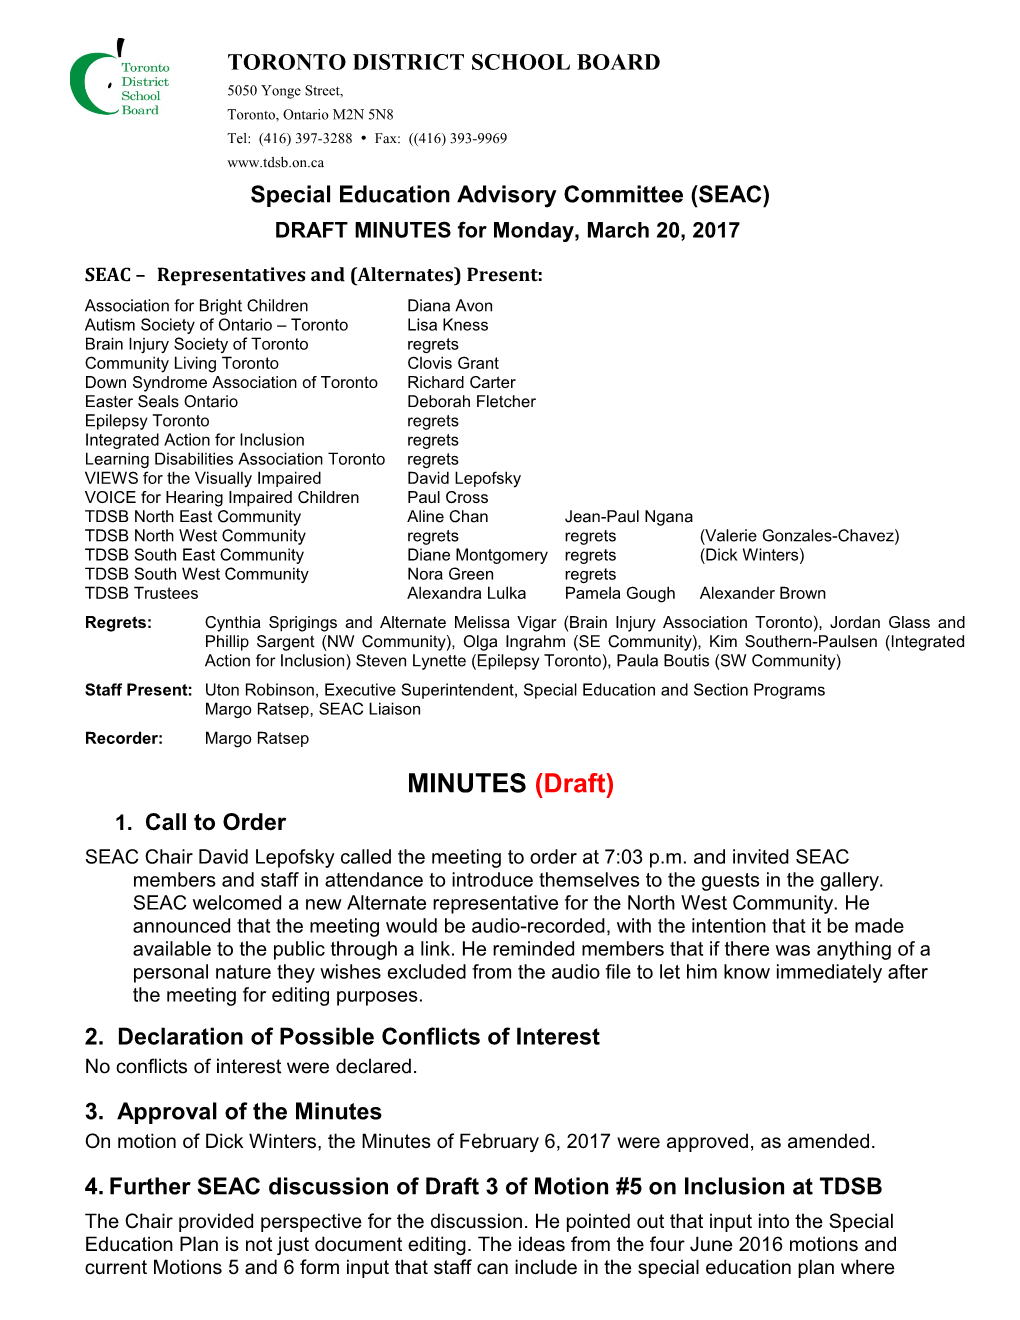 Special Education Advisory Committee (SEAC) TDSB Special Education Reform Draft Motions s2